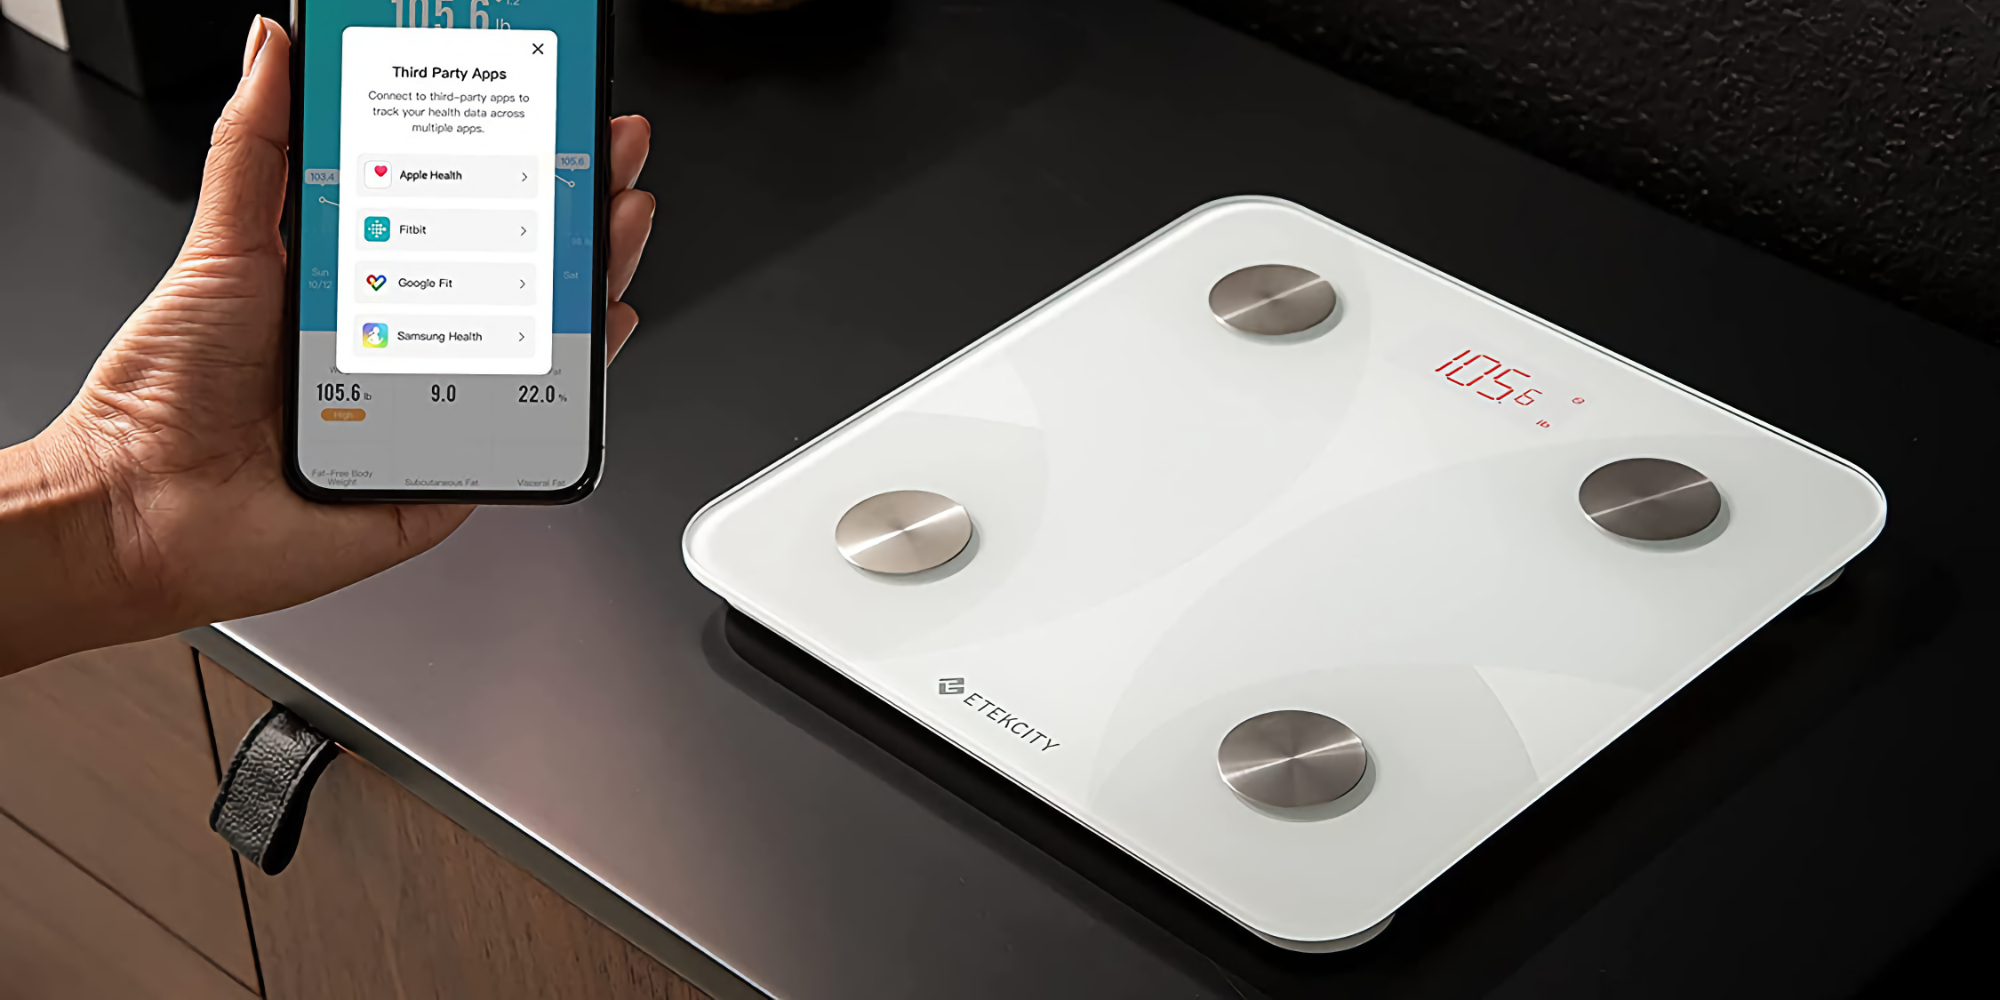 https://9to5toys.com/wp-content/uploads/sites/5/2021/08/Etekcity-FIT-8S-Bluetooth-Smart-Scale-2.jpg